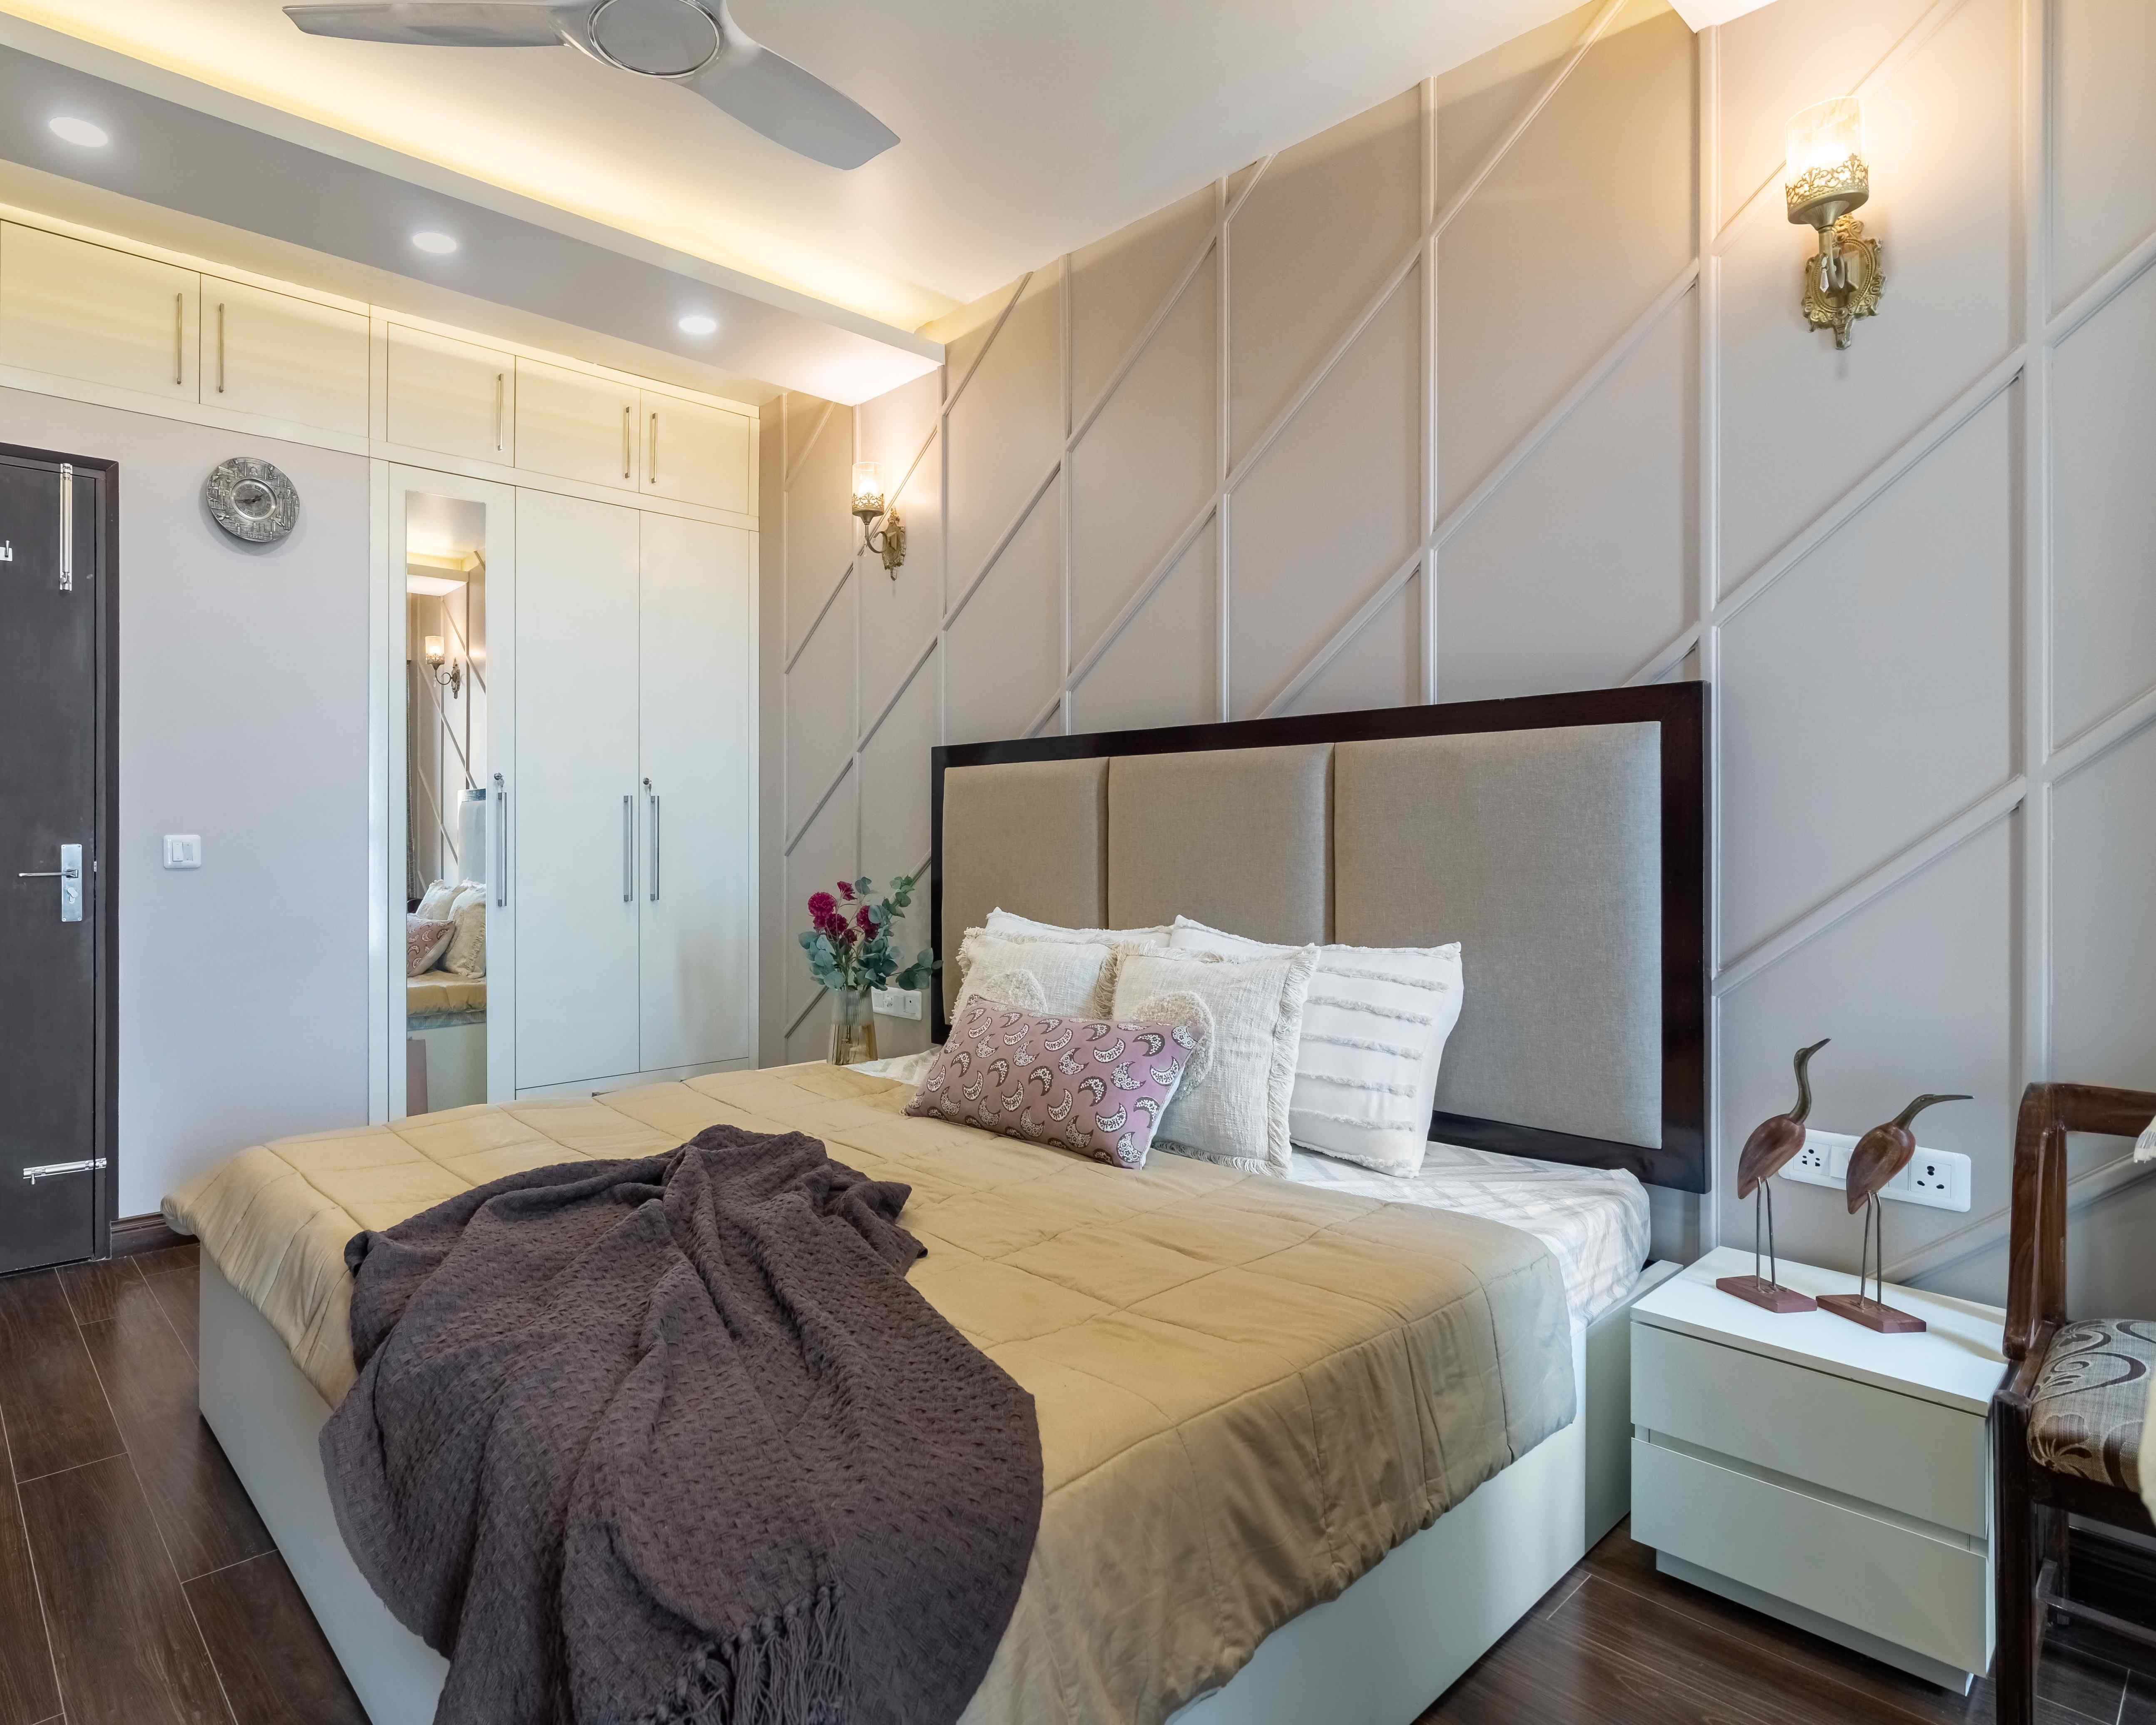 Modern Bedroom Wall Design With Grey Trims